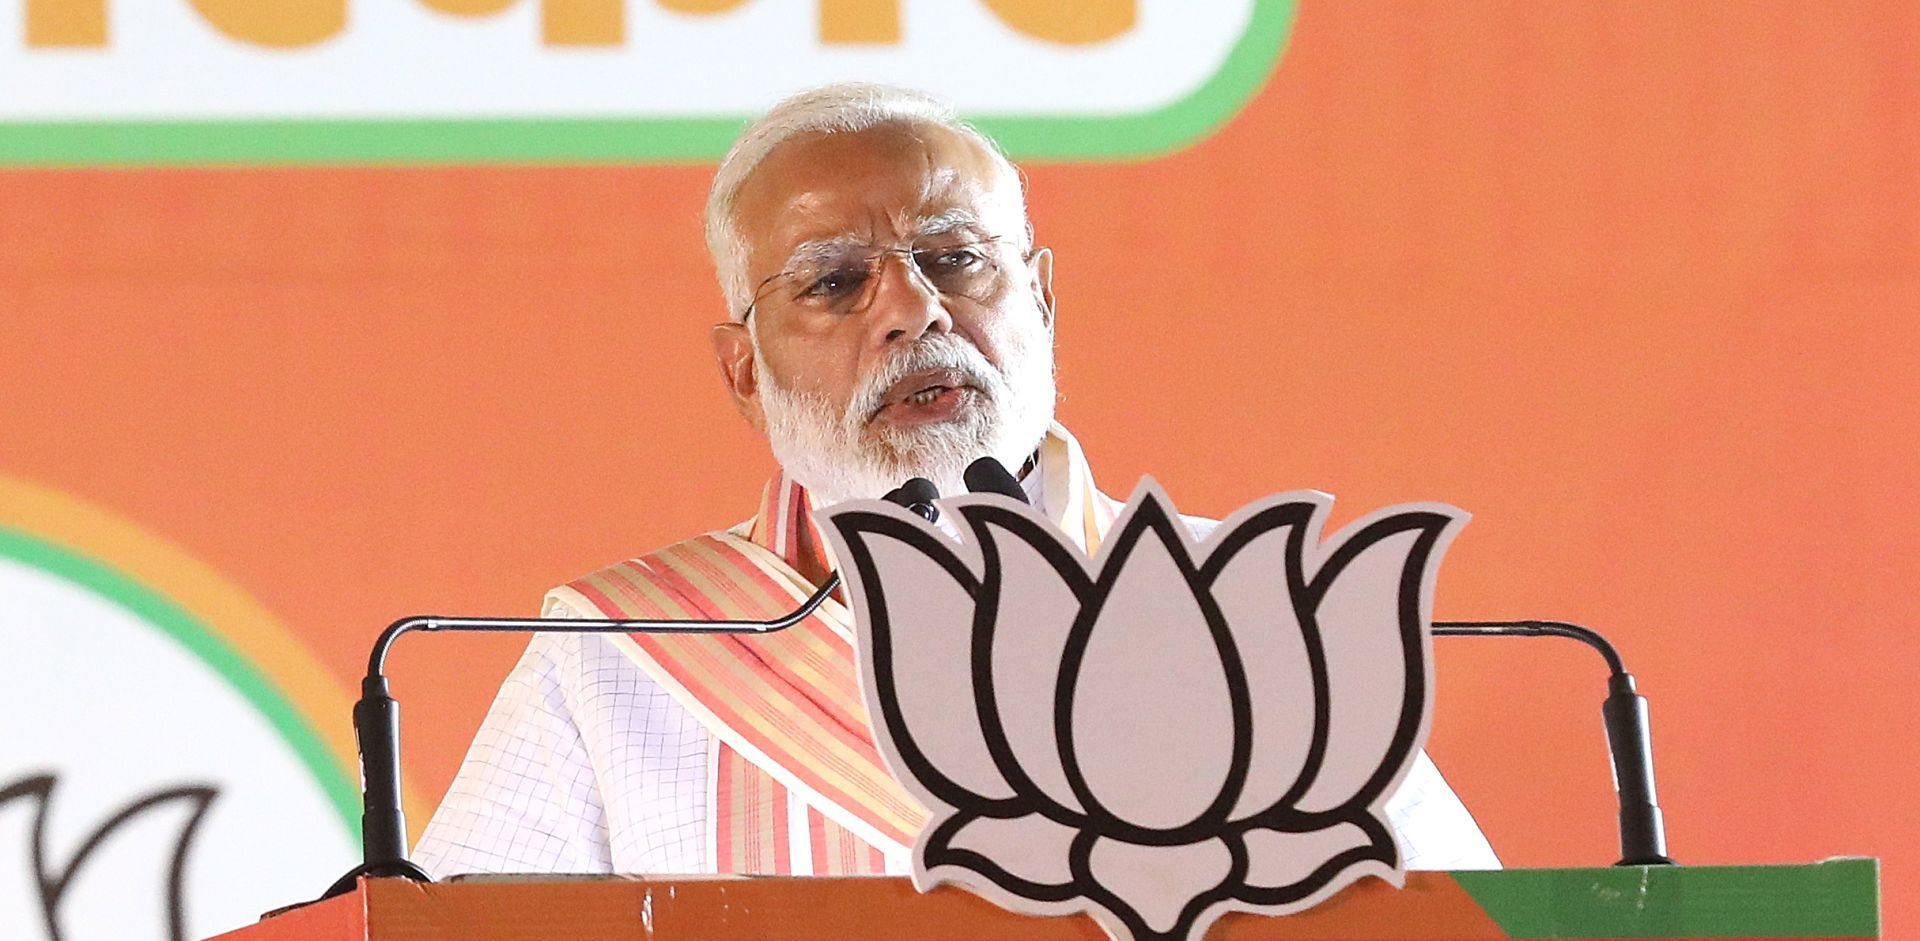 epa07556037 Bhartya Janta Party (BJP) leader and Indian Prime Minister Narendra Modi speak during an election campaign rally at Ramlila Maidan in New Delhi, India, 08 May 2019. Voting for the Parliamentary elections in Delhi will be held in a single phase on 12 May 2019. The parliamentary elections, which began on 11 April 2019, are to be conducted in seven phases throughout India and the result will be announced on 23 May.  EPA/HARISH TYAGI